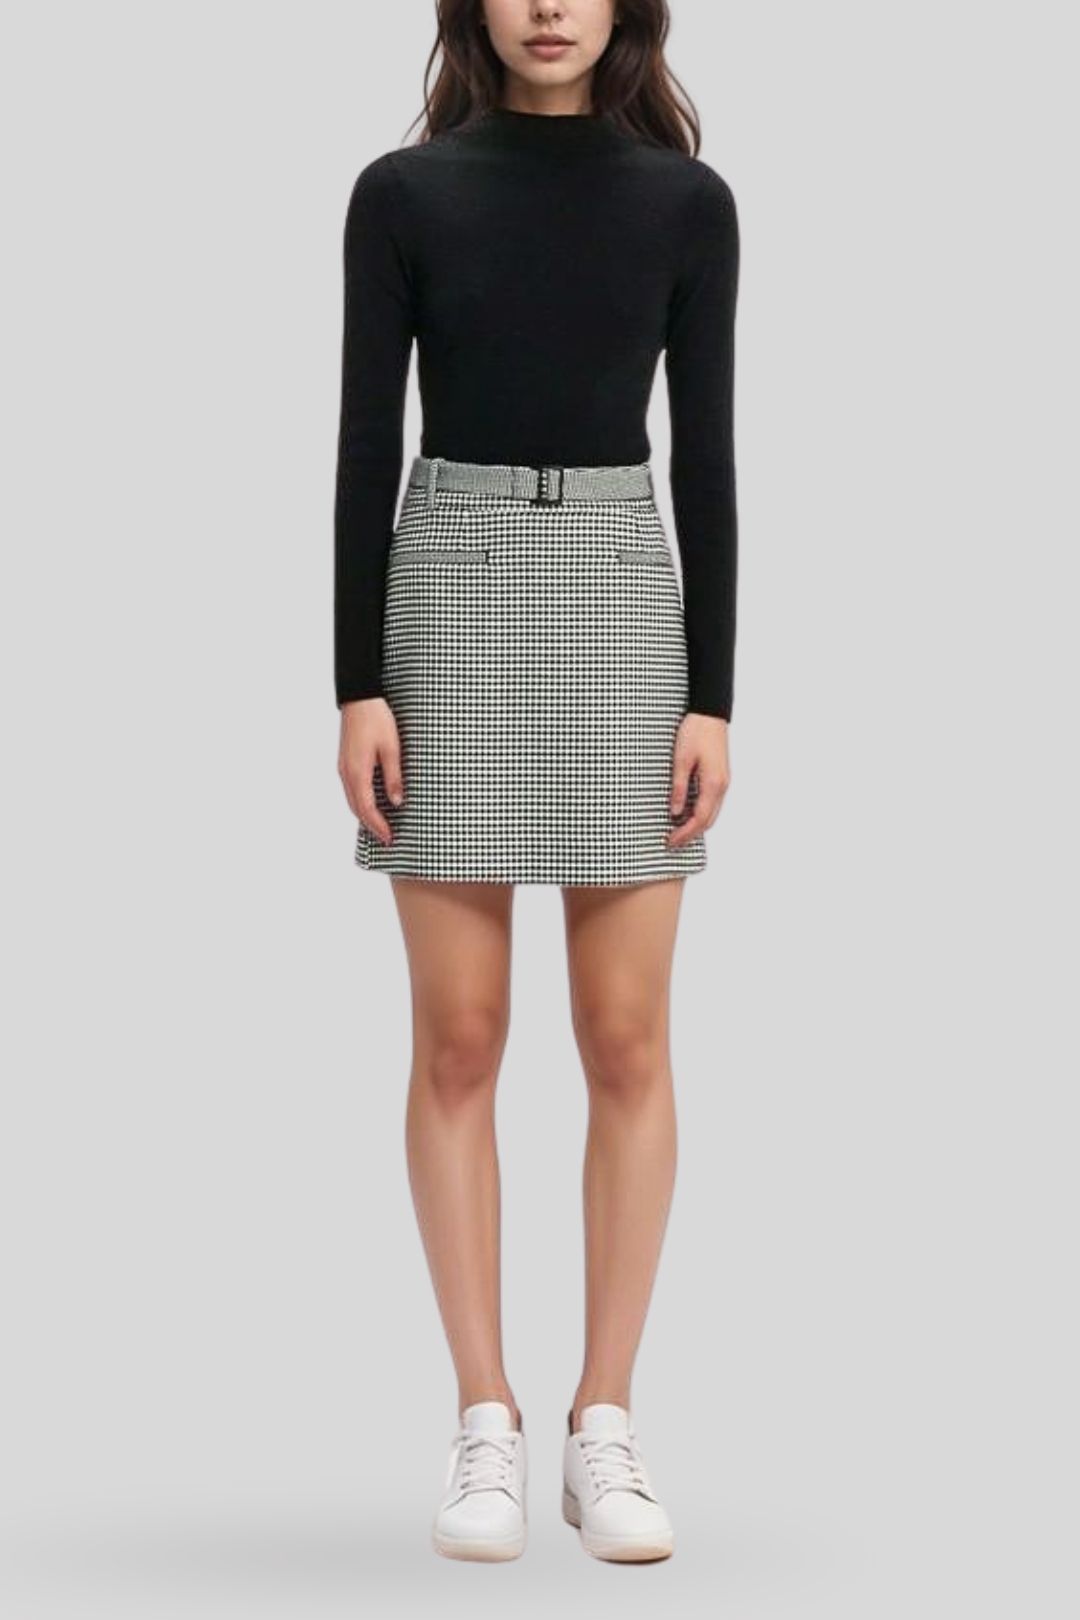 Cue Mini Houndstooth Skirt